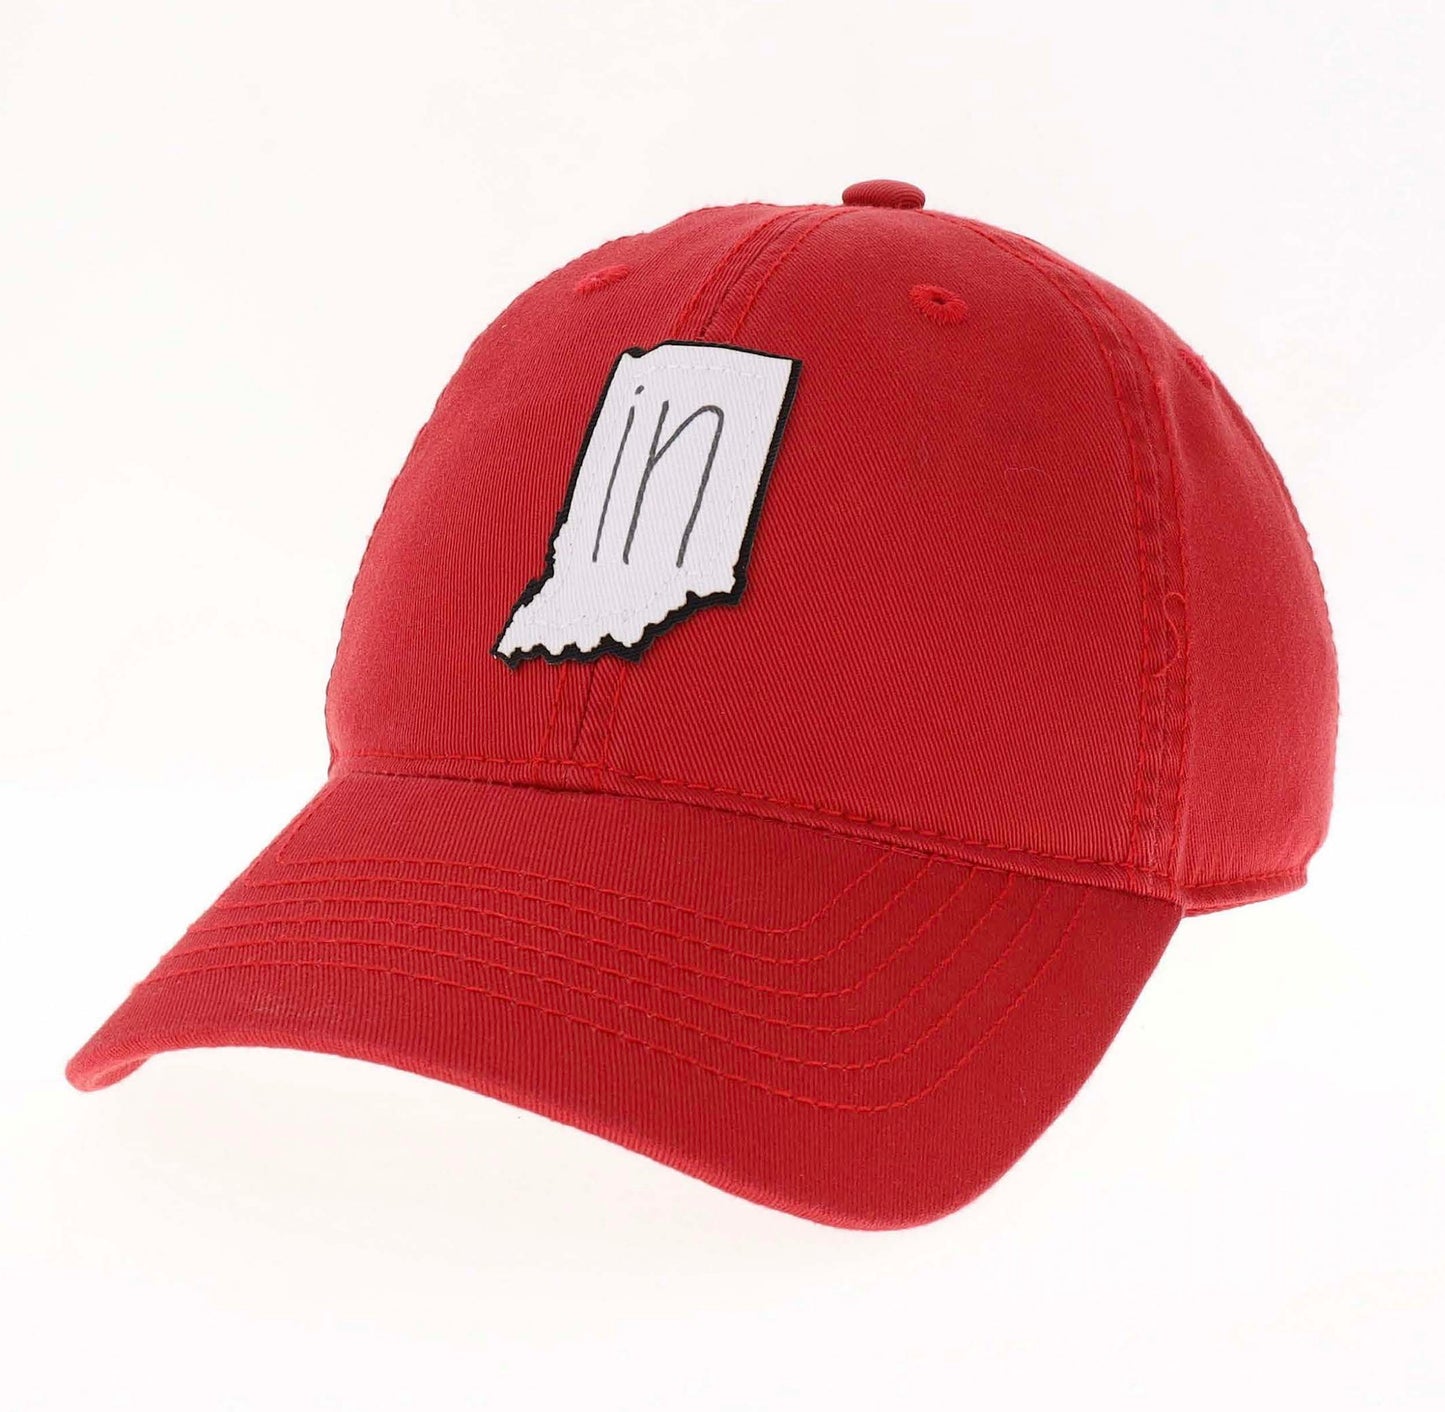 Indiana Relax Twill Hat in Scarlet